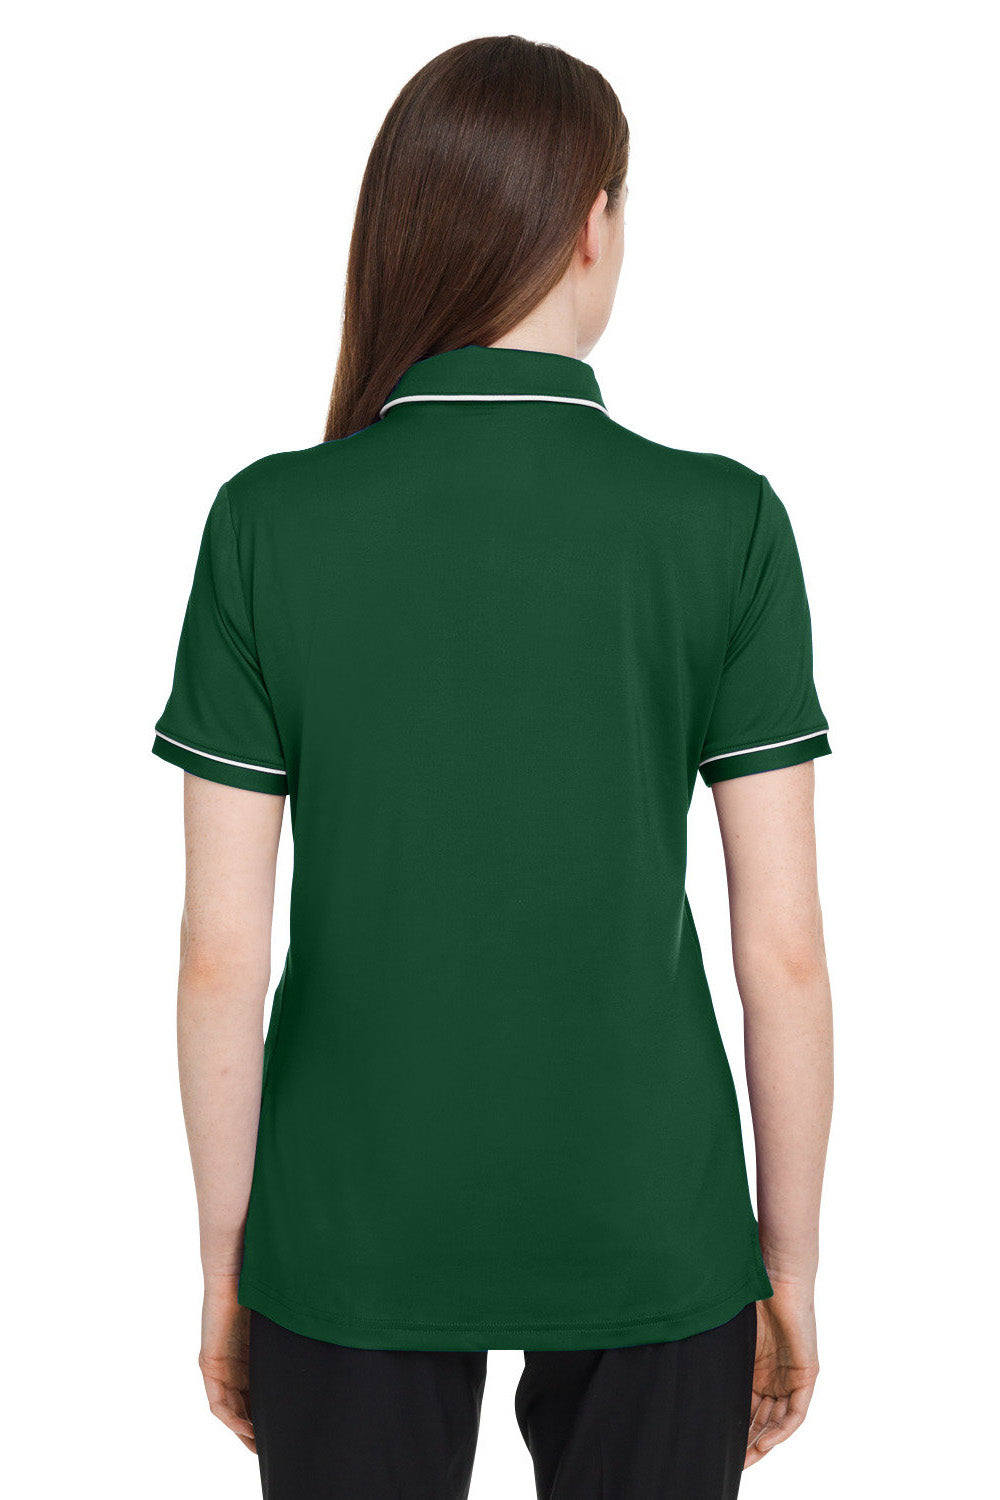 Under Armour 1376905 Womens Teams Performance Moisture Wicking Short Sleeve Polo Shirt Forest Green Model Back